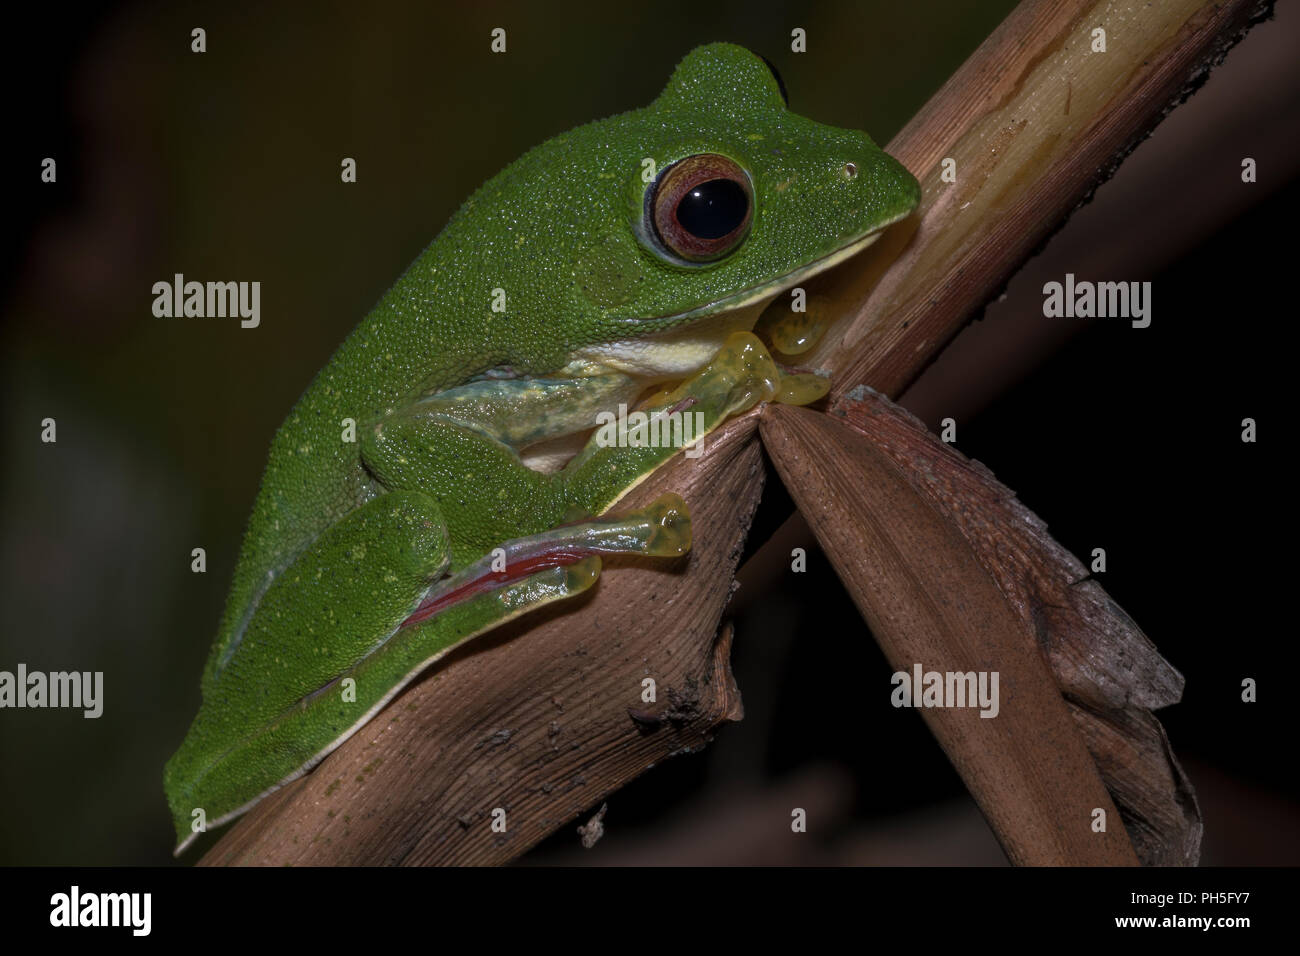 Malabar gliding frog or Rhacophorus malabaricus, perched up on a branch at night Stock Photo